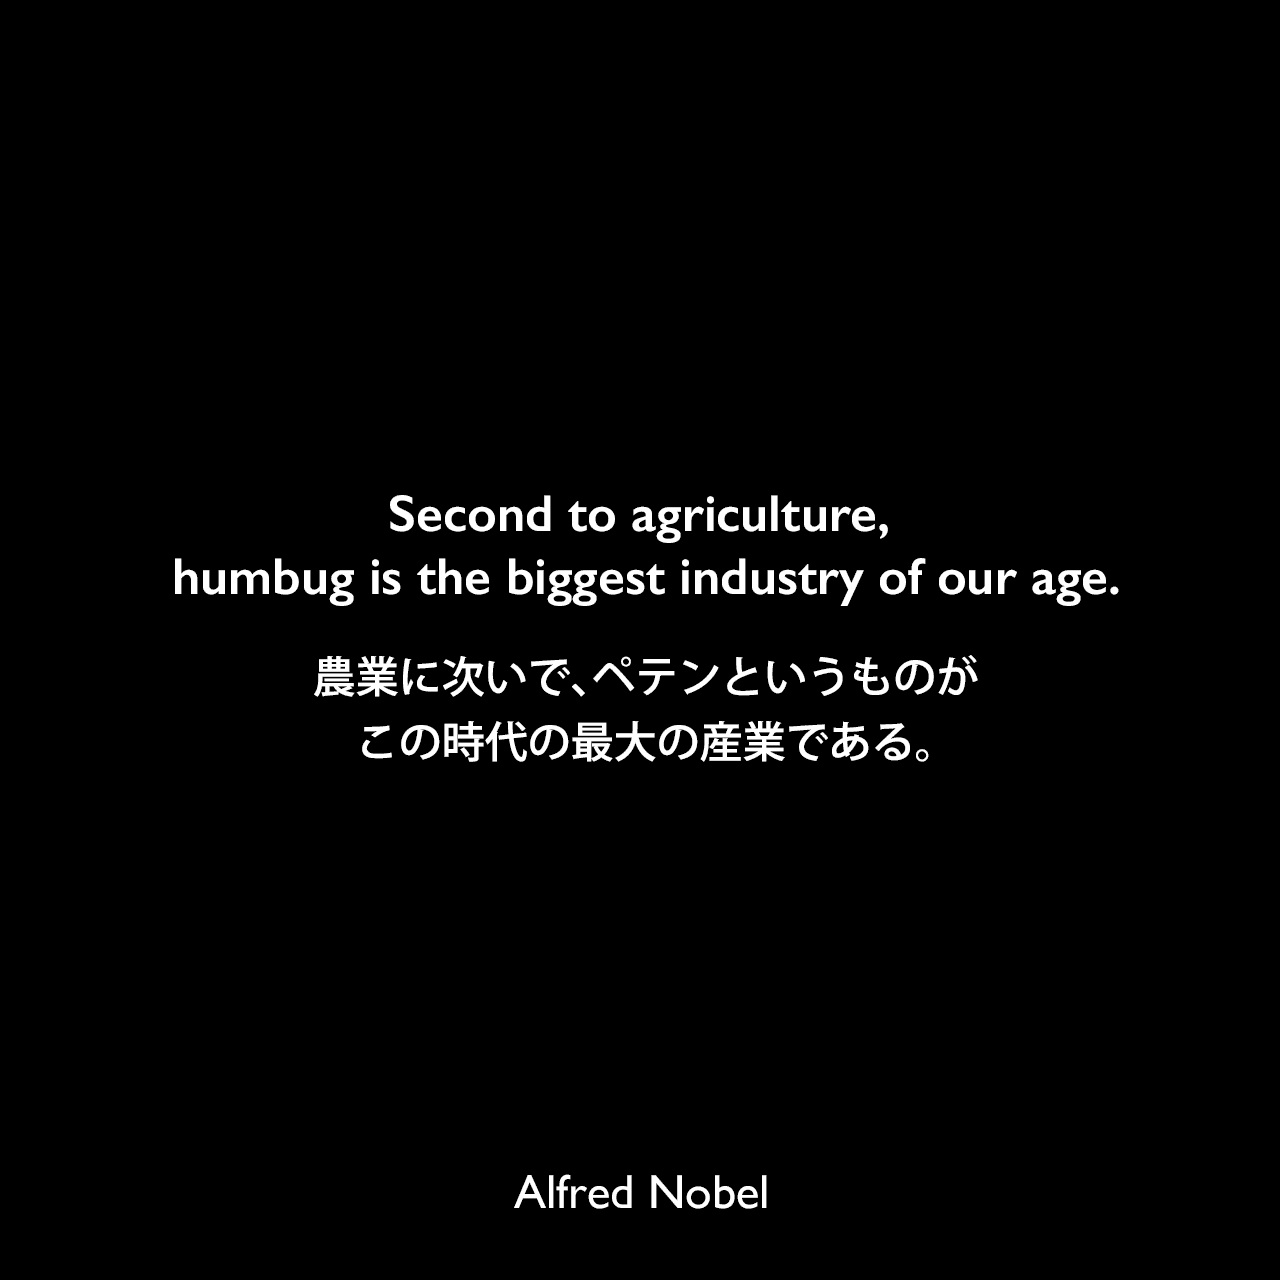 Second to agriculture, humbug is the biggest industry of our age.農業に次いで、ペテンというものがこの時代の最大の産業である。Alfred Nobel